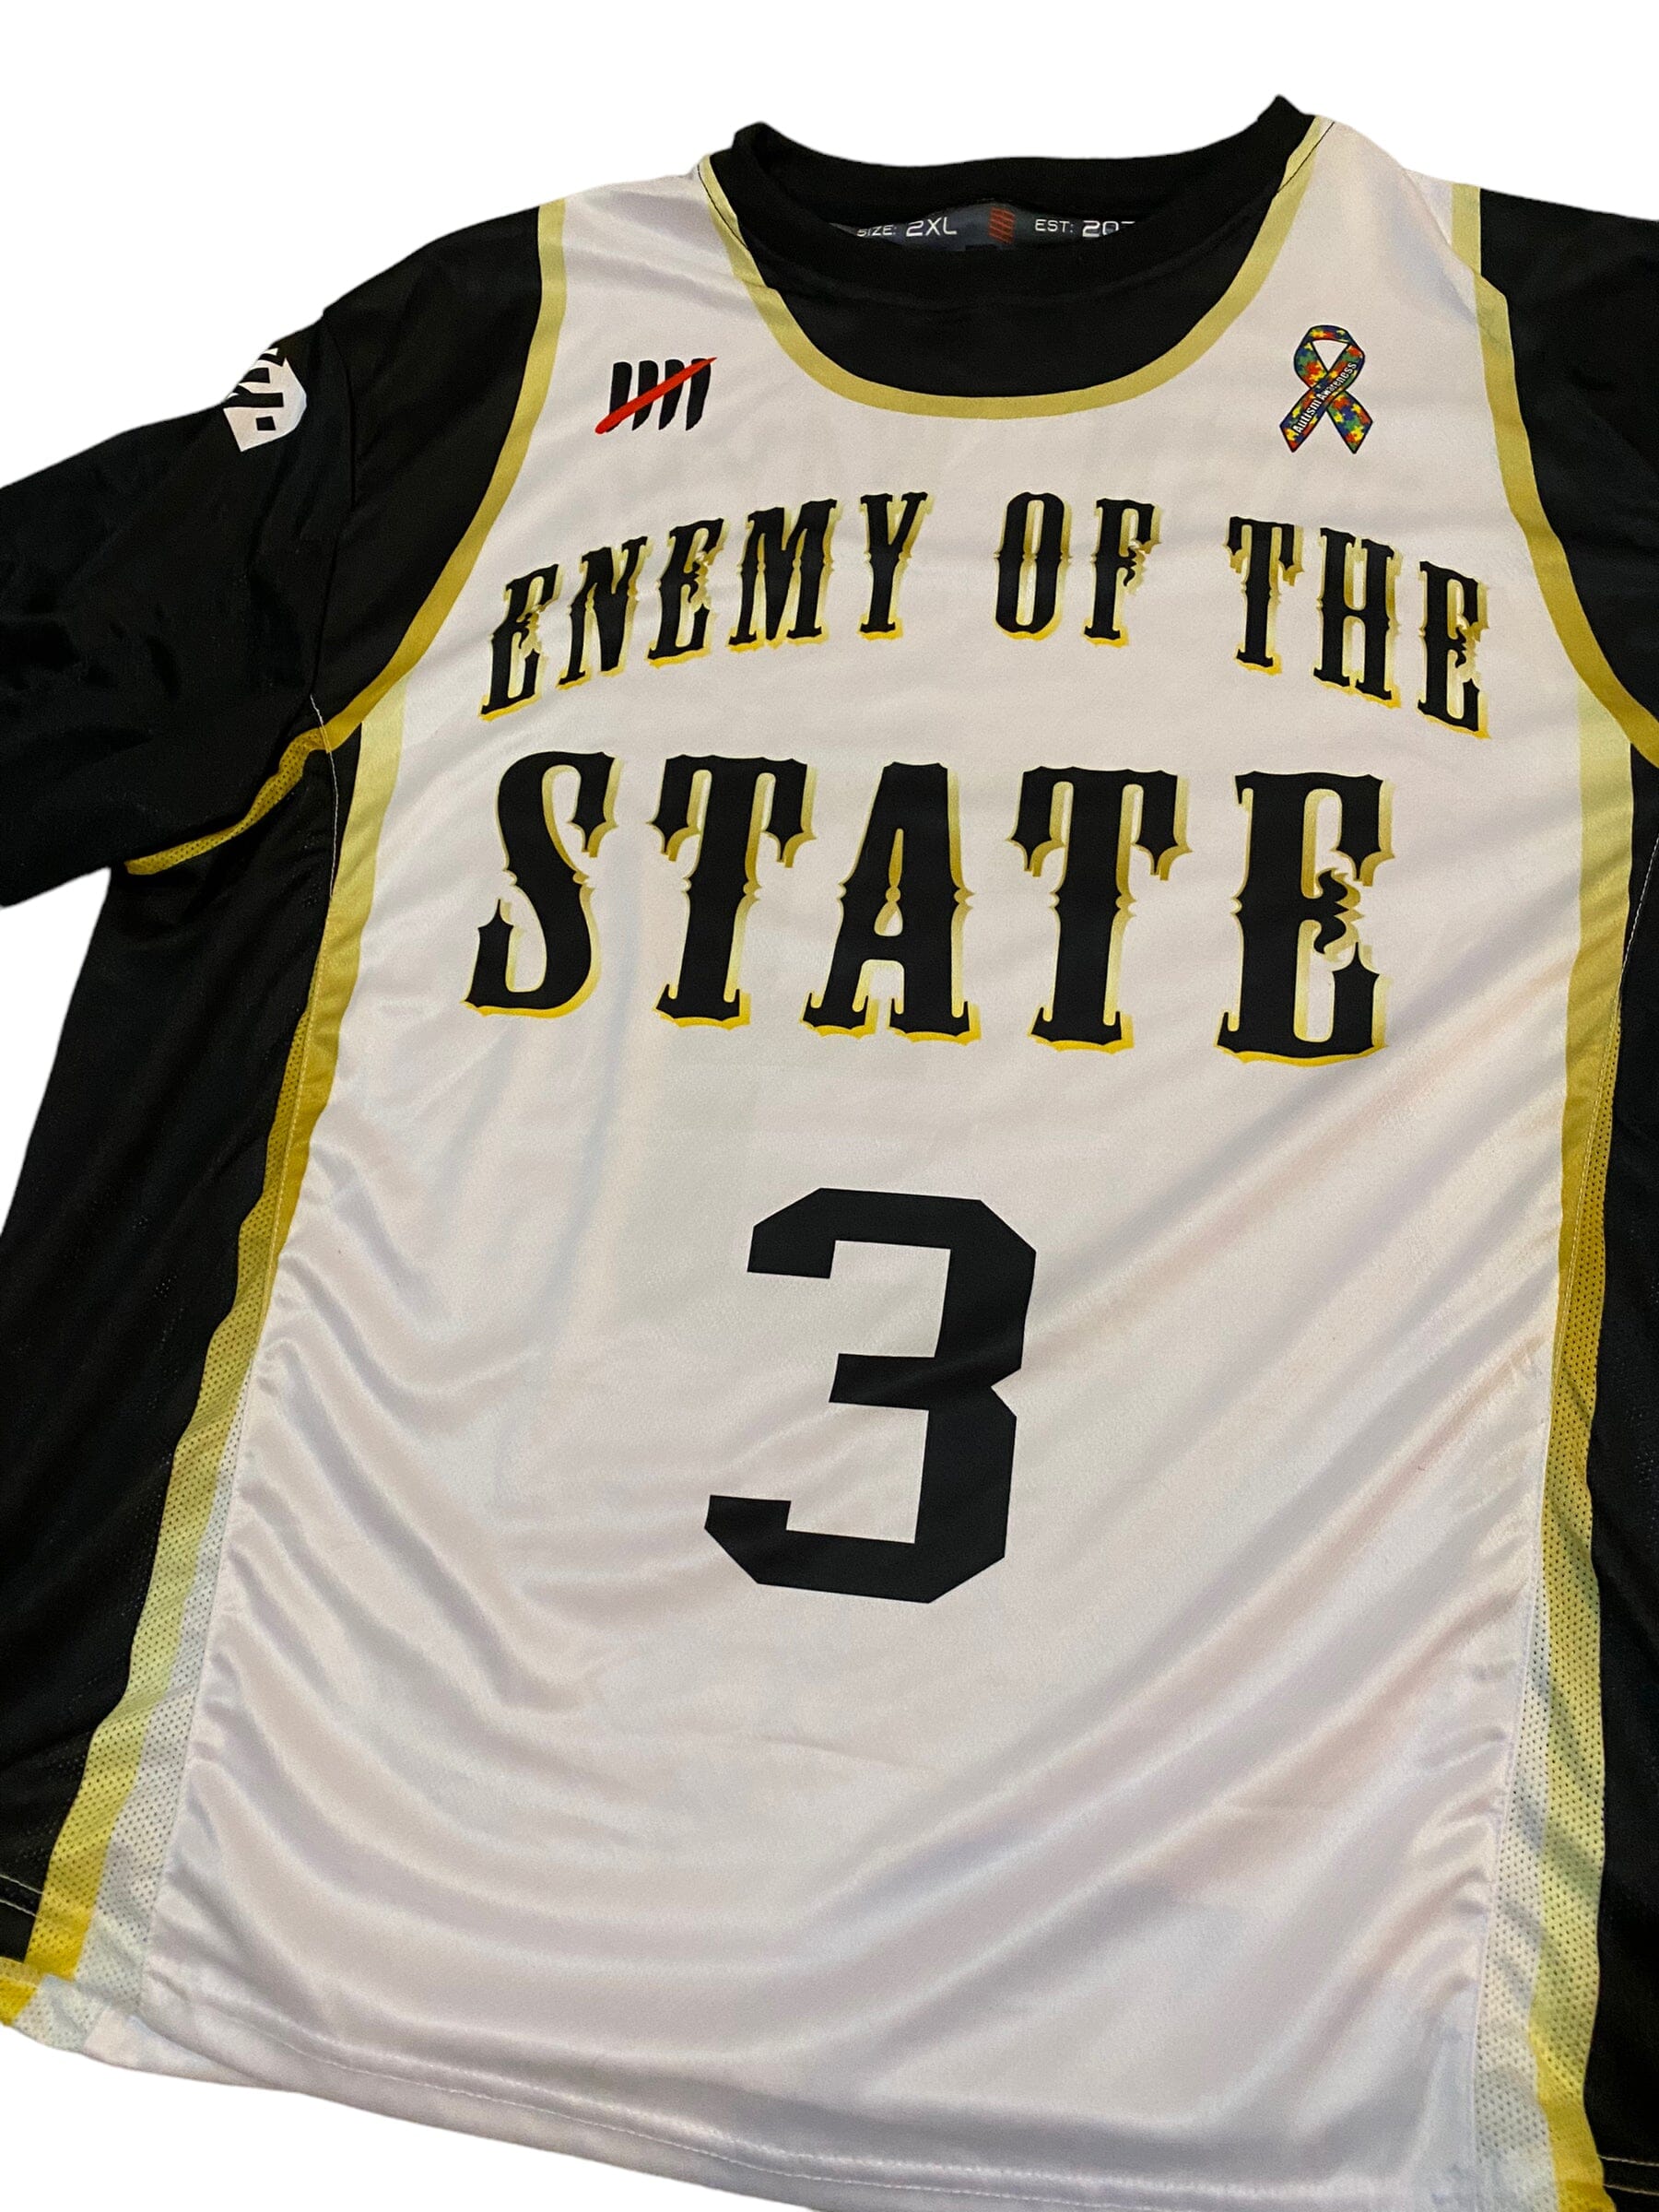 Used Enemy Of The State Paintball Jersey 2XL Paintball Gun from CPXBrosPaintball Buy/Sell/Trade Paintball Markers, Paintball Hoppers, Paintball Masks, and Hormesis Headbands